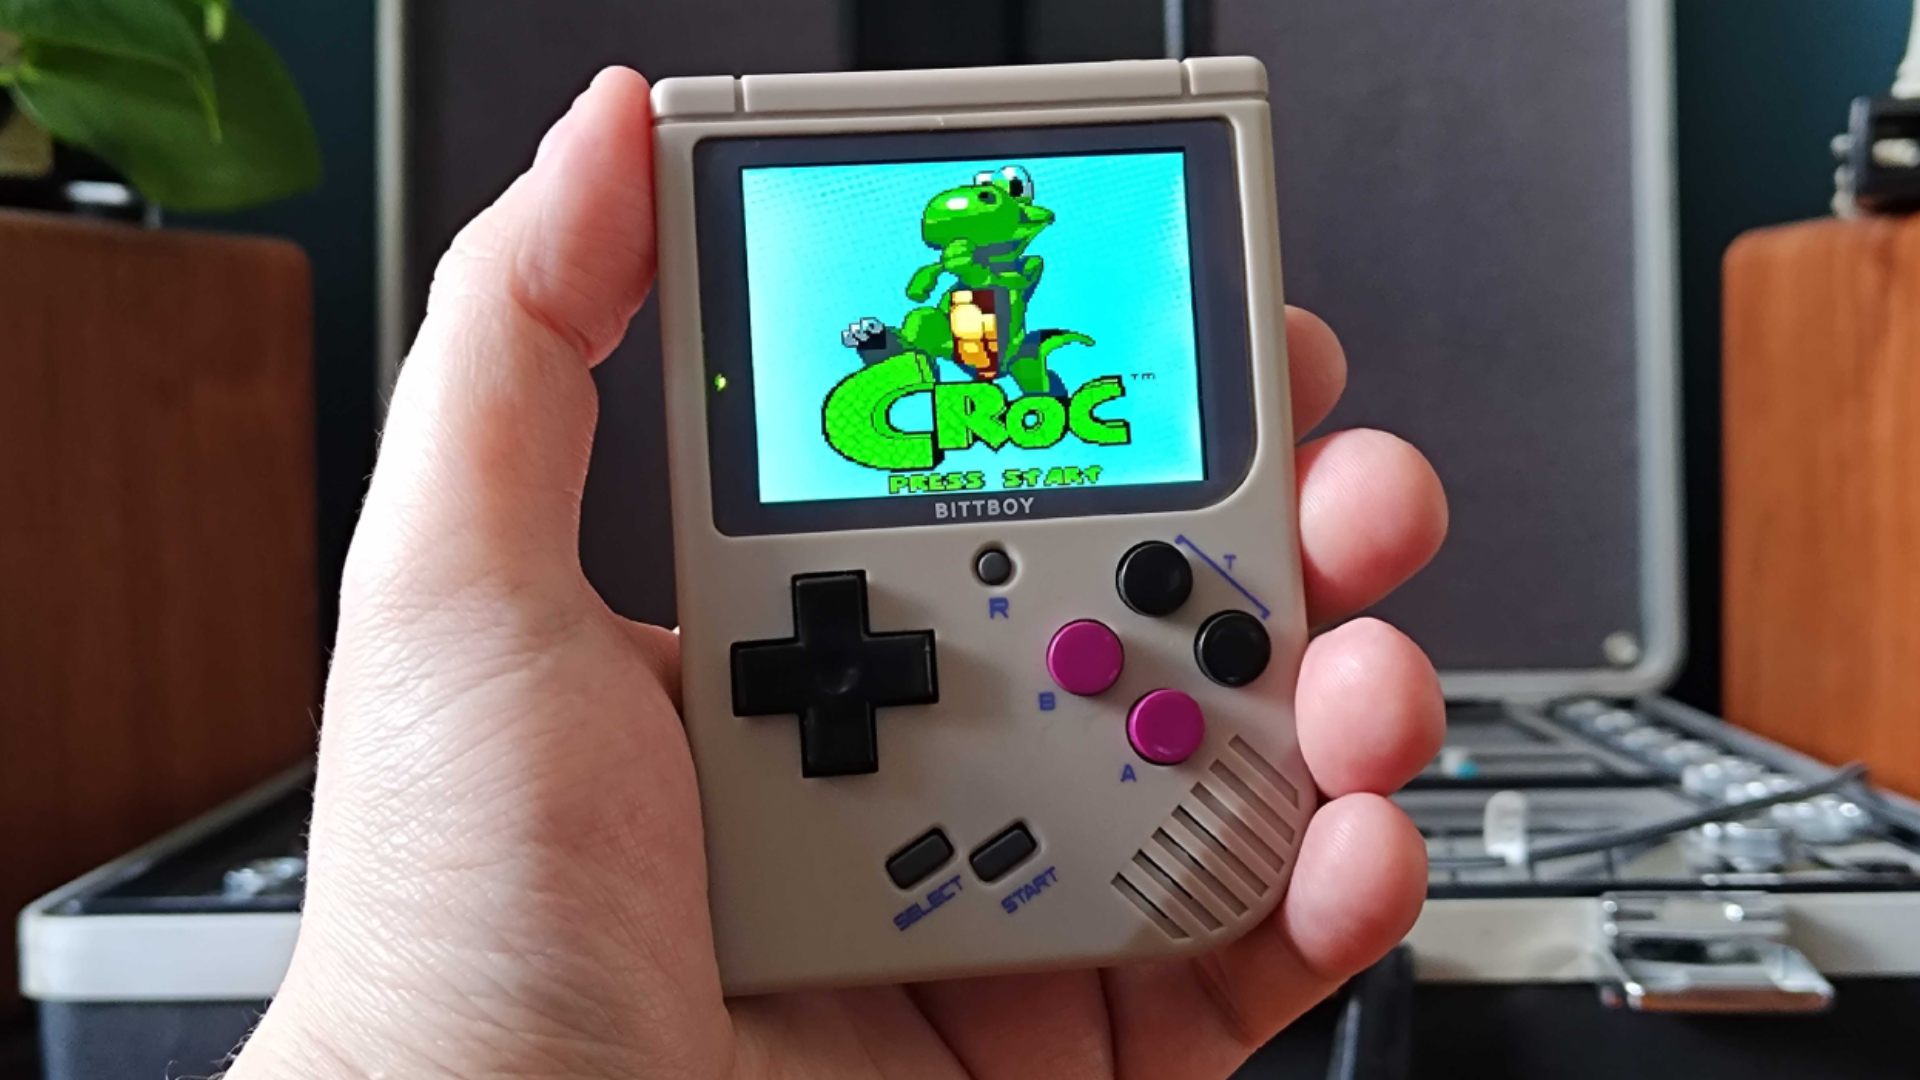 Bittboy with Croc for Gameboy Color on screen